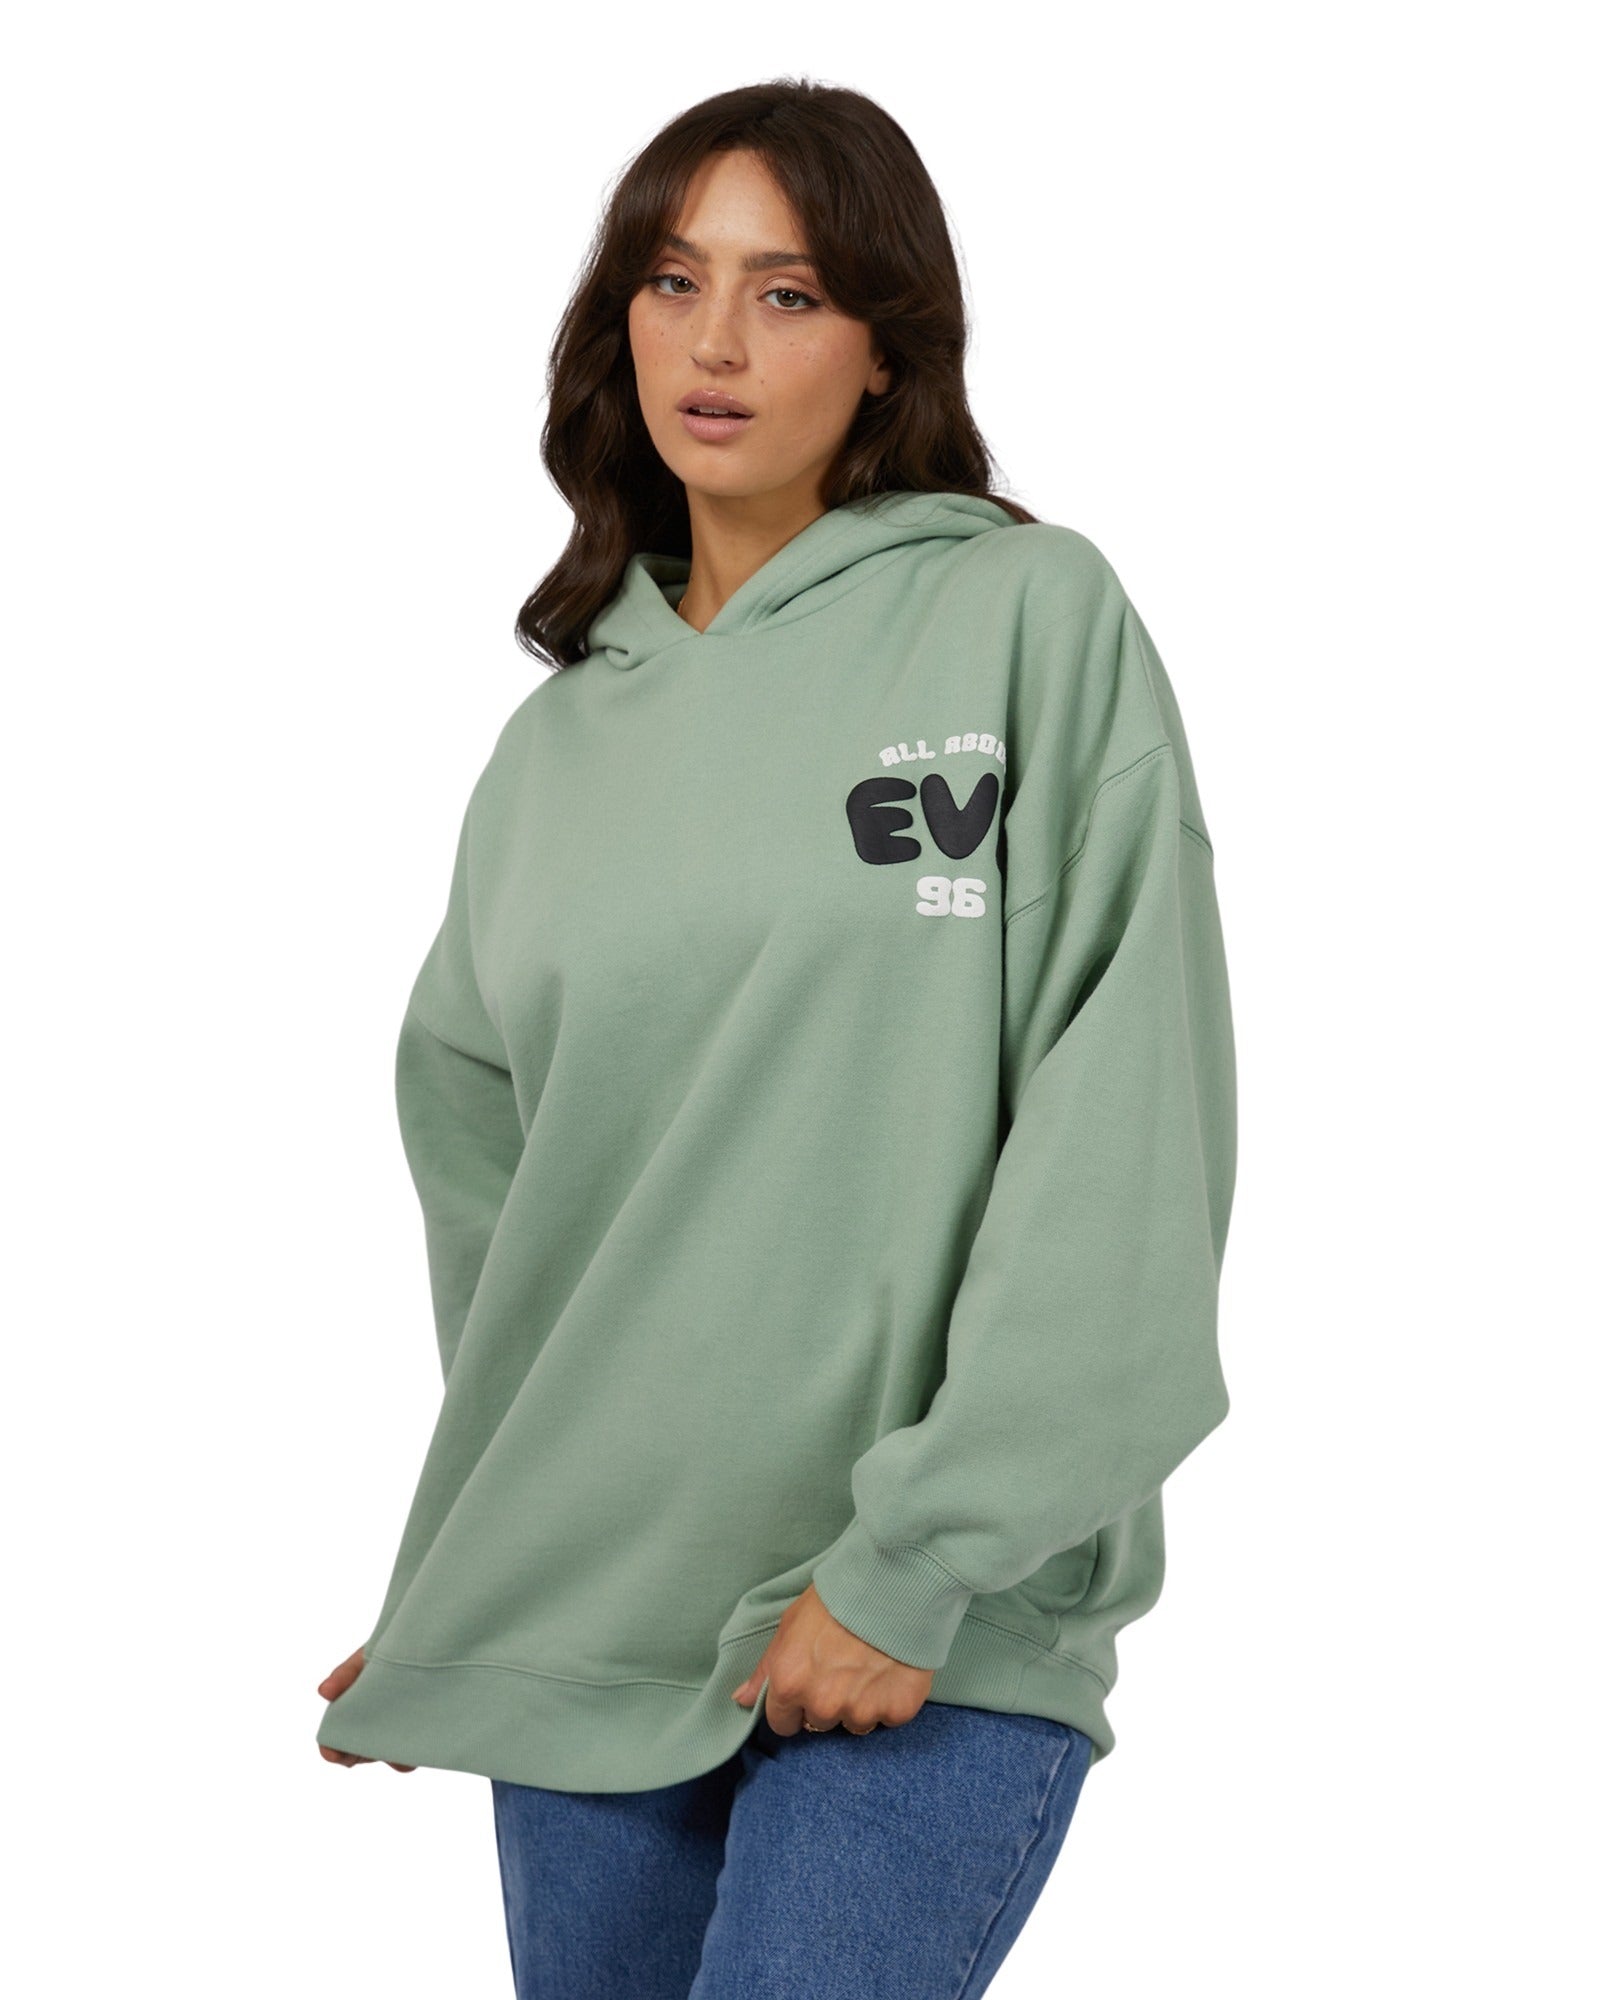 All About Eve - Exhale Hoody - Sage